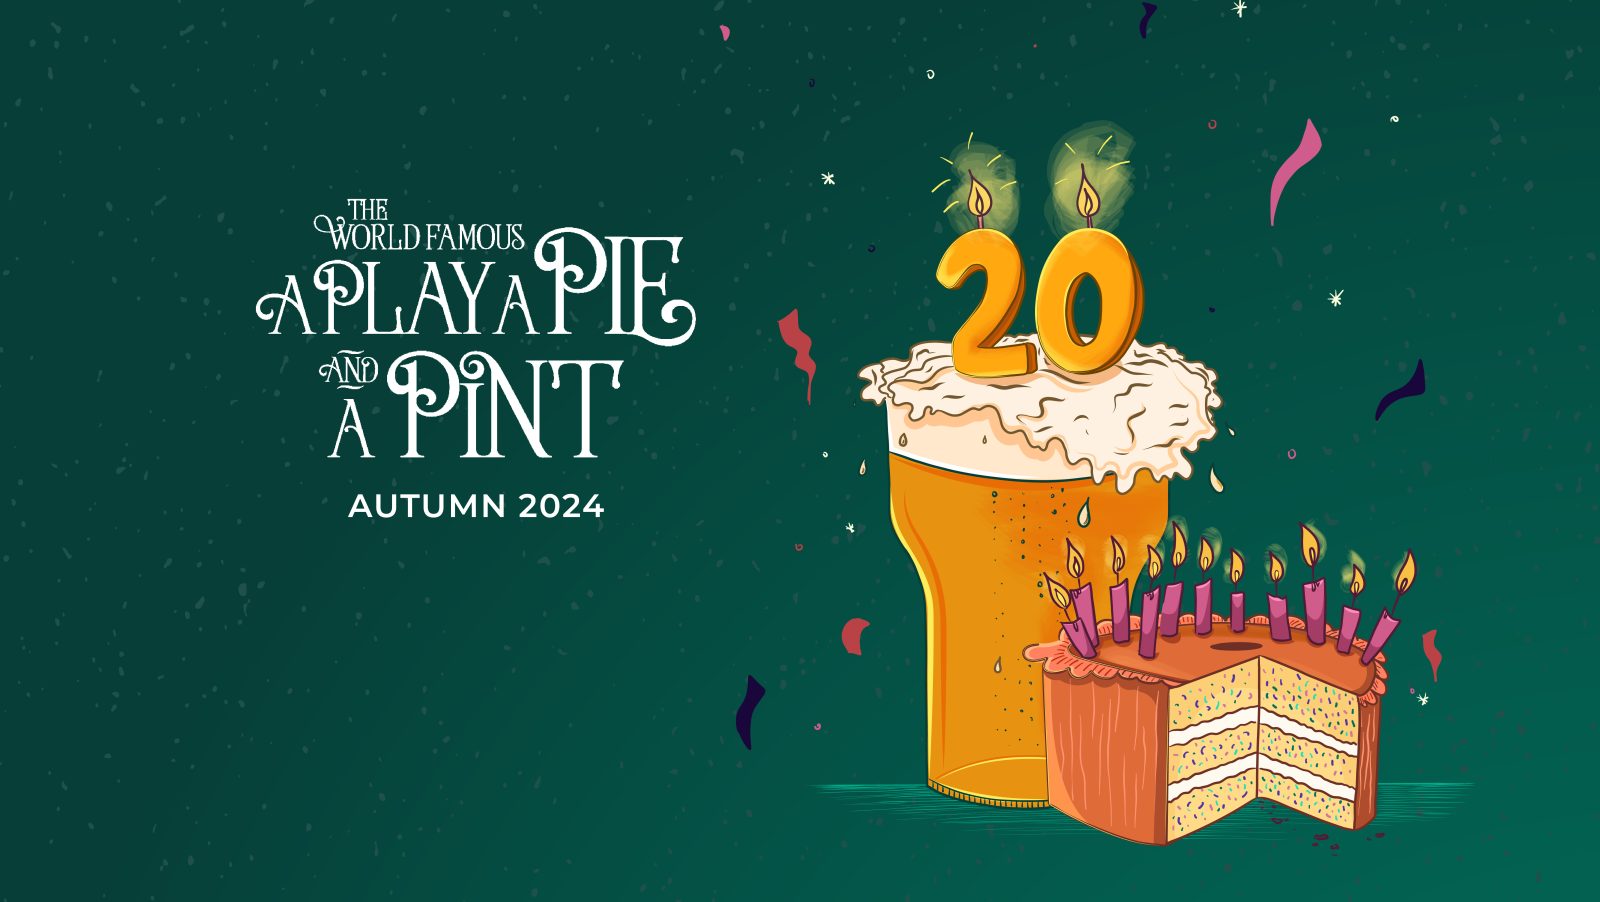 An illustration of a pint with '20' in gold candles on top, with a pie that is cut inside like a birthday cake. 